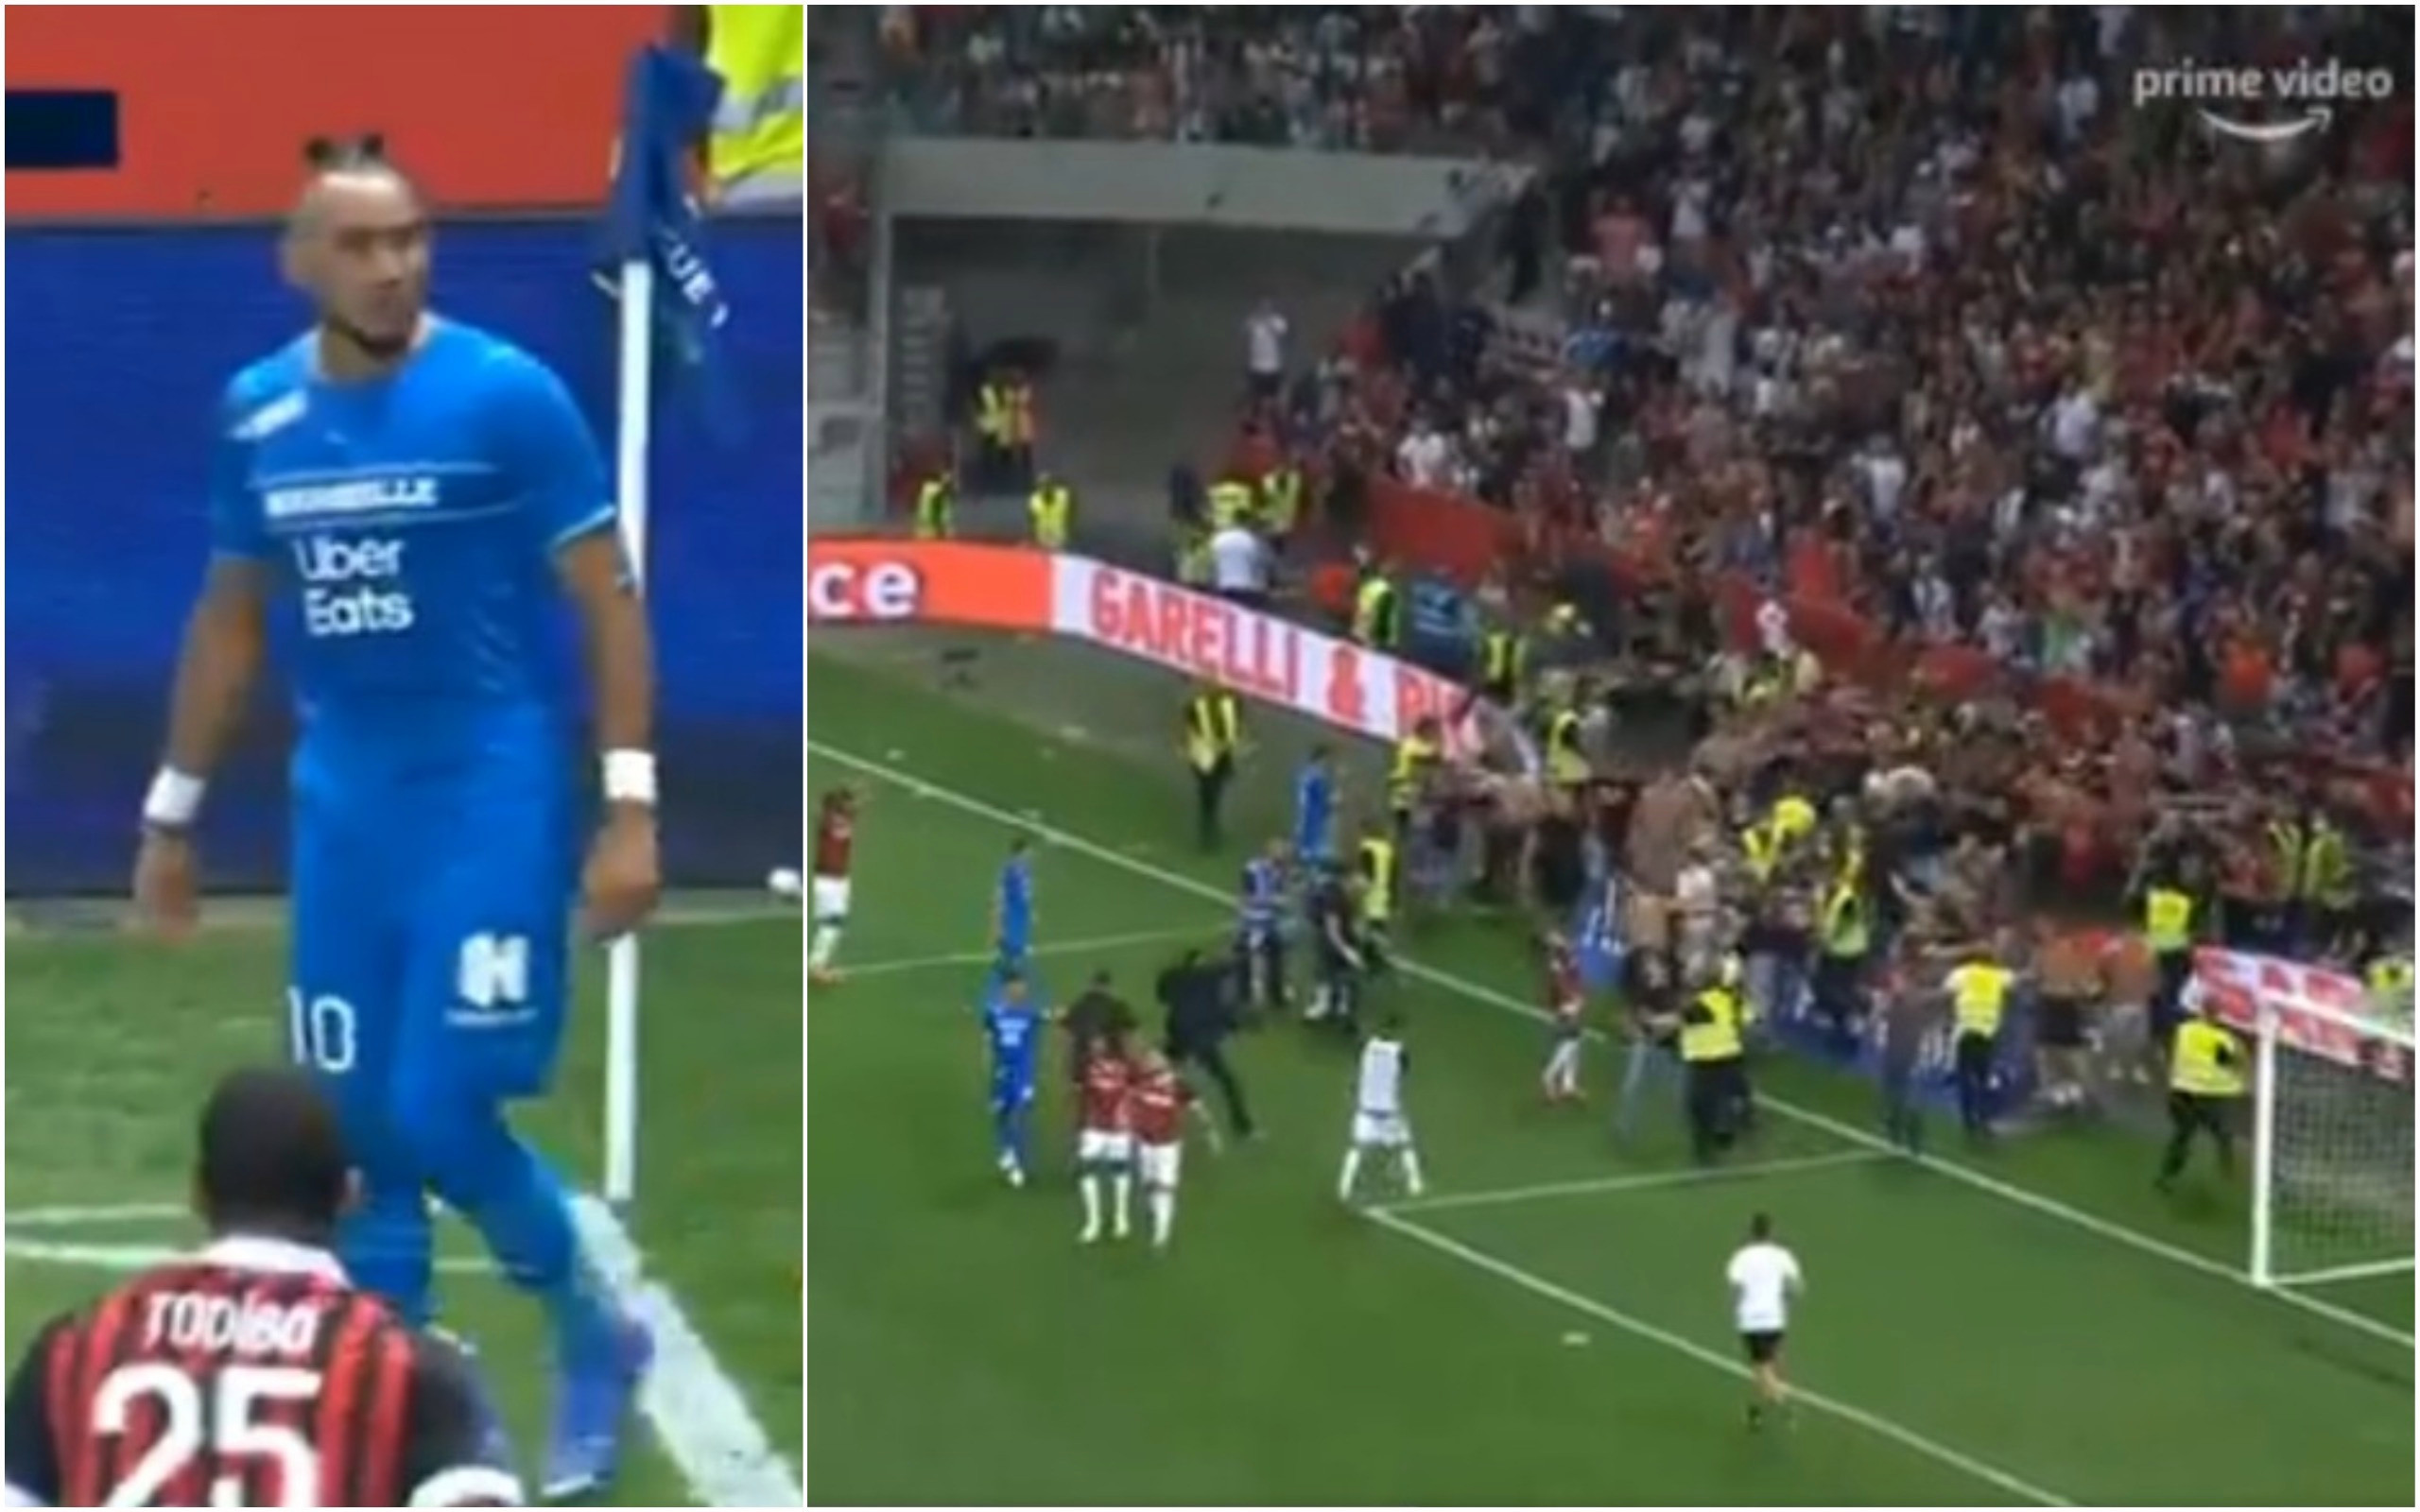 Dimitri Payet sparks pitch invasion after throwing bottle back at Nice fans during Marseille clash